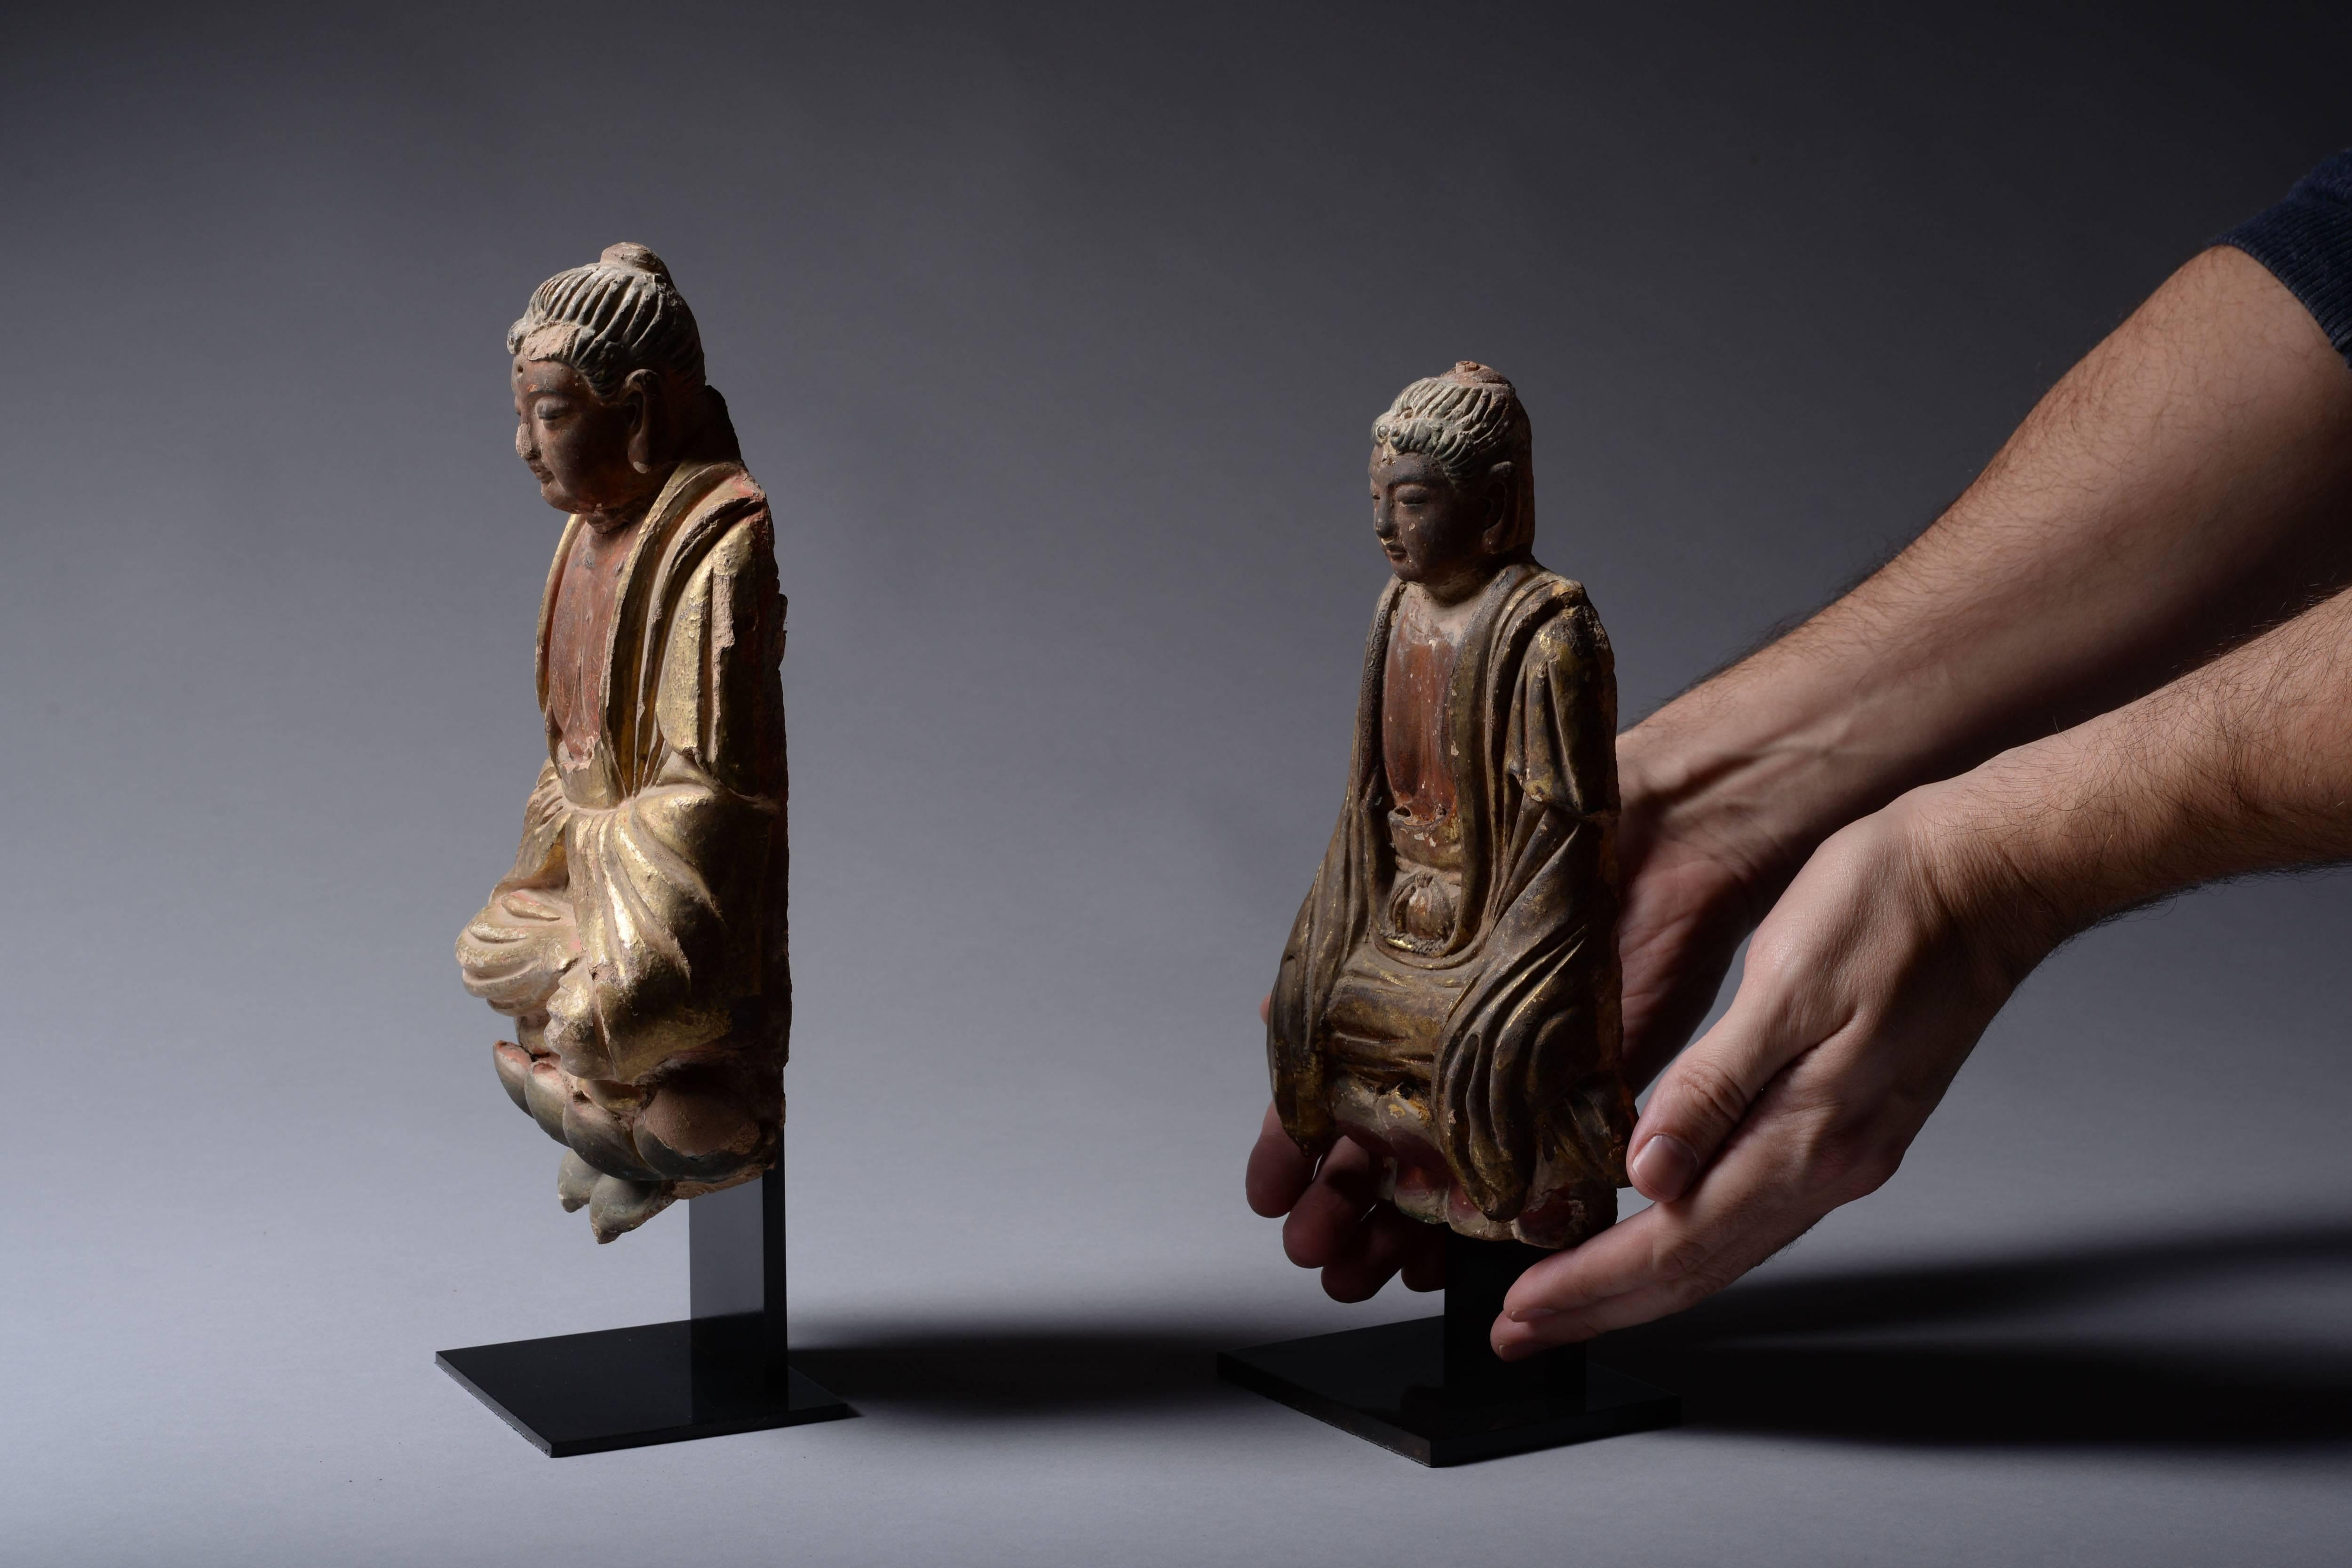 18th Century and Earlier Ancient Chinese Ming Dynasty Seated Buddha Statues, 1275 AD